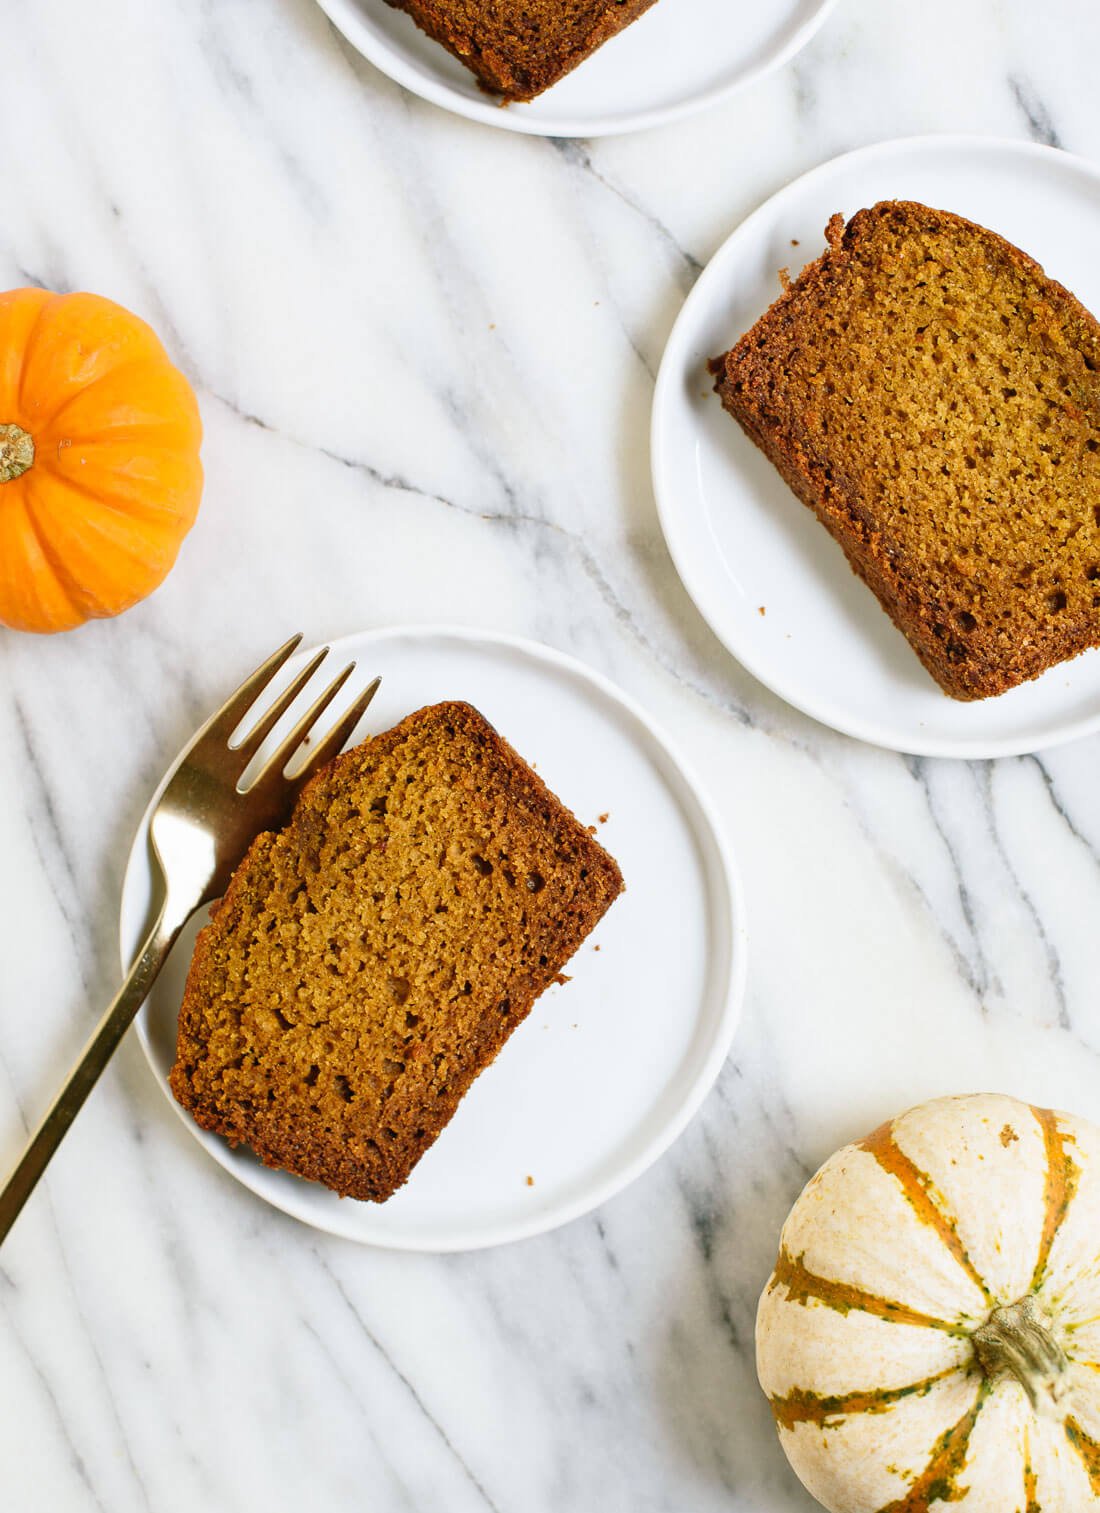 This healthy pumpkin bread recipe is SO delicious! It's so moist and fluffy, no one will guess it's naturally sweetened and made with 100% whole grains. cookieandkate.com